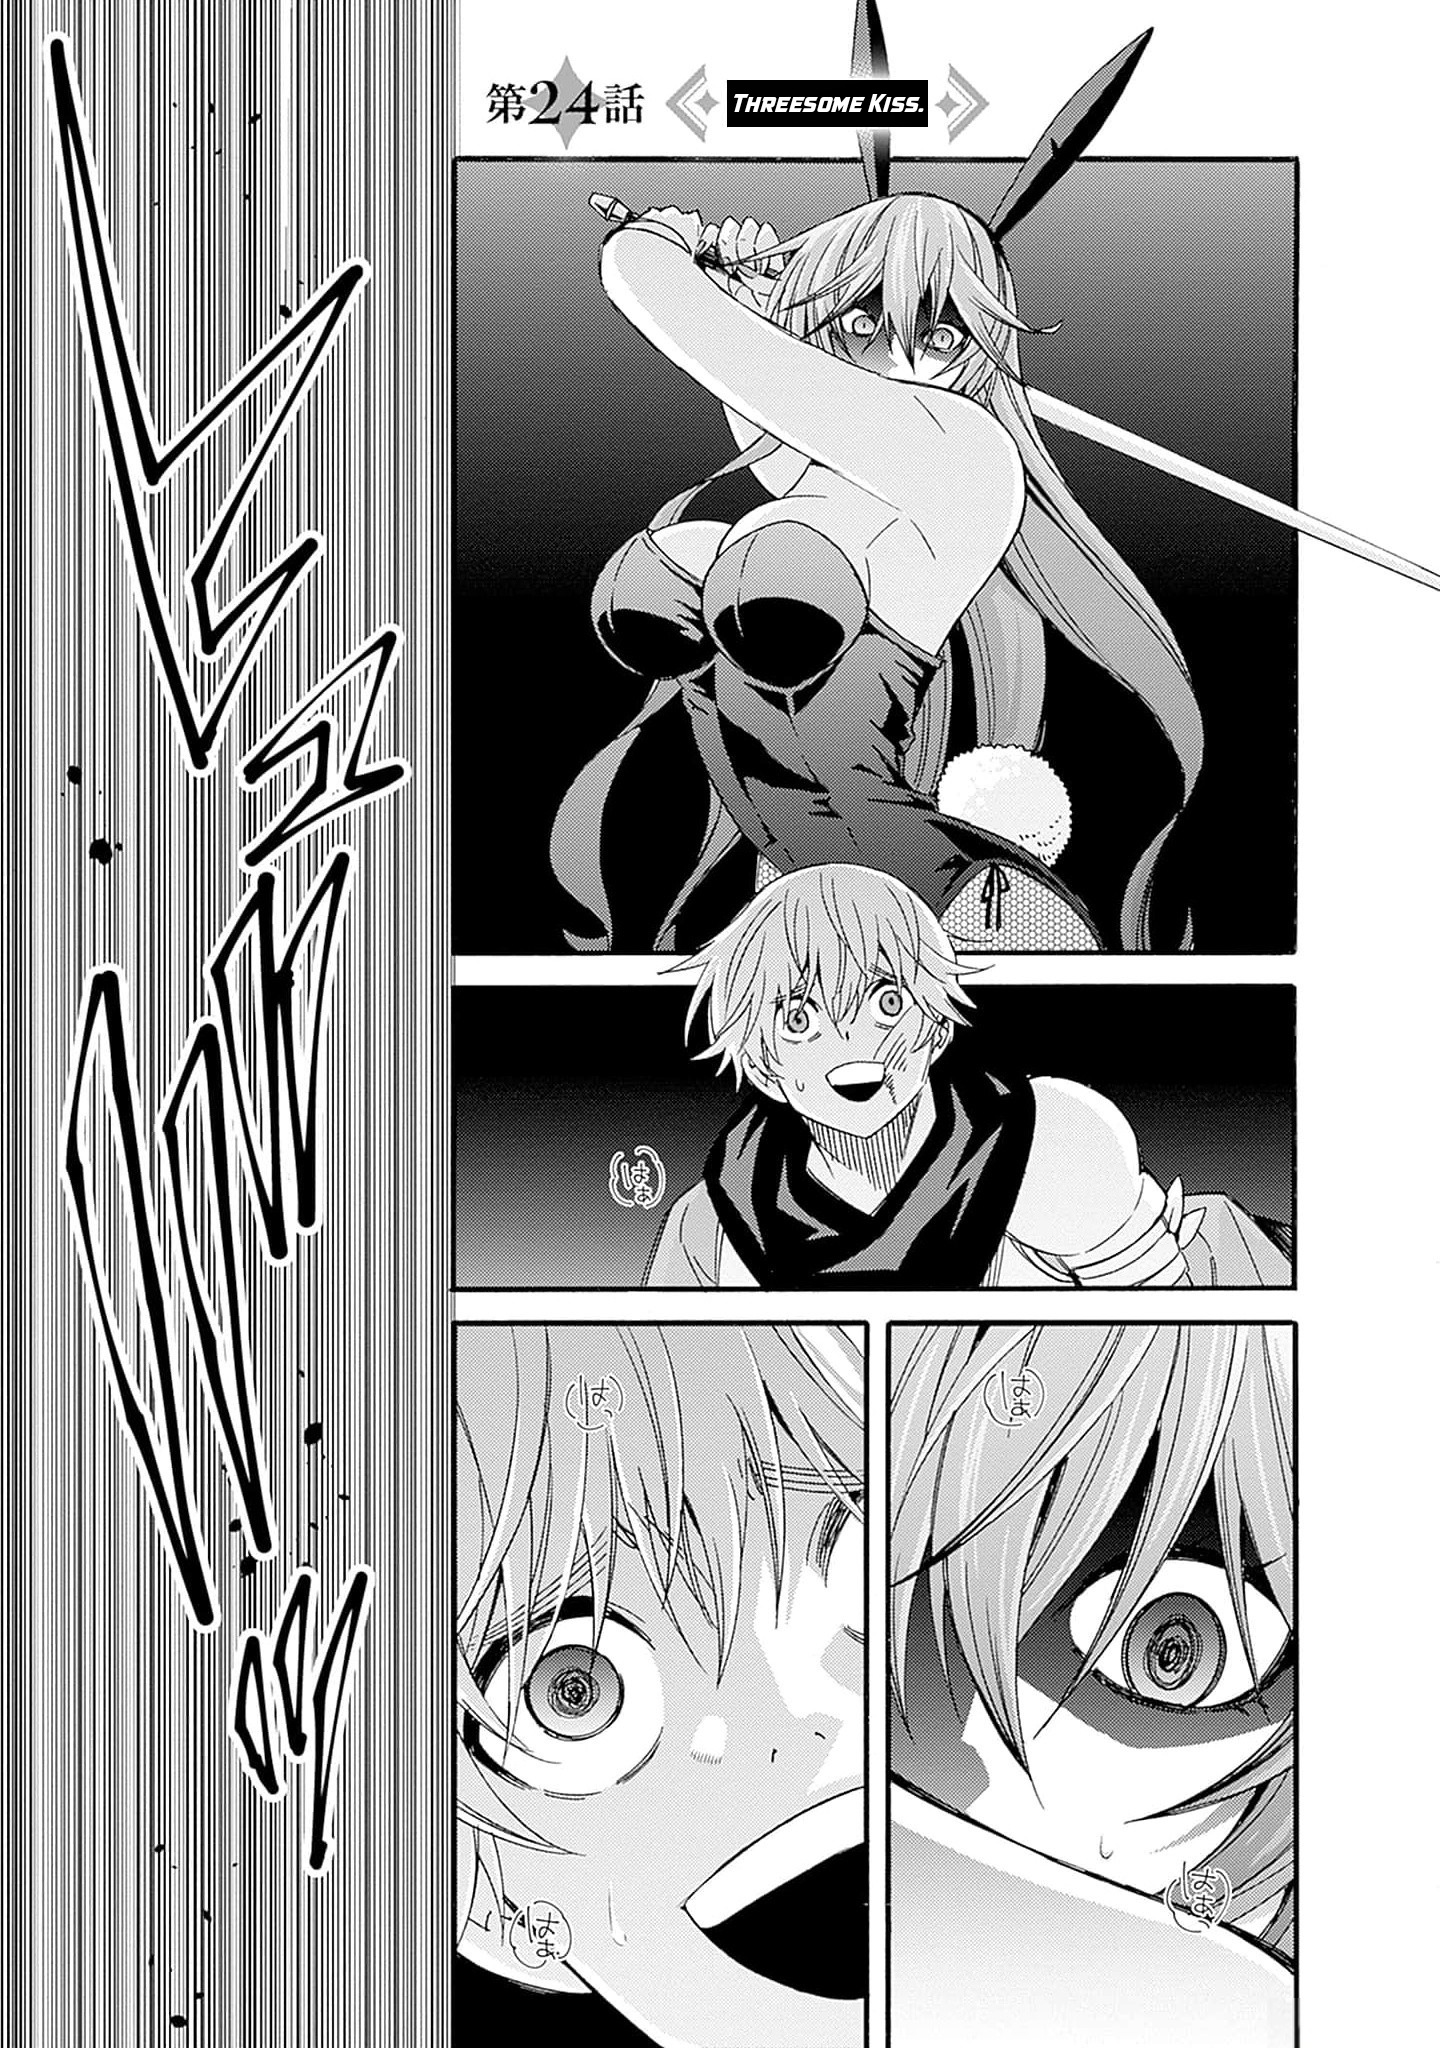 The Best Noble In Another World: The Bigger My Harem Gets, The Stronger I Become Vol.3 Chapter 24: Threesome Kiss - Picture 2